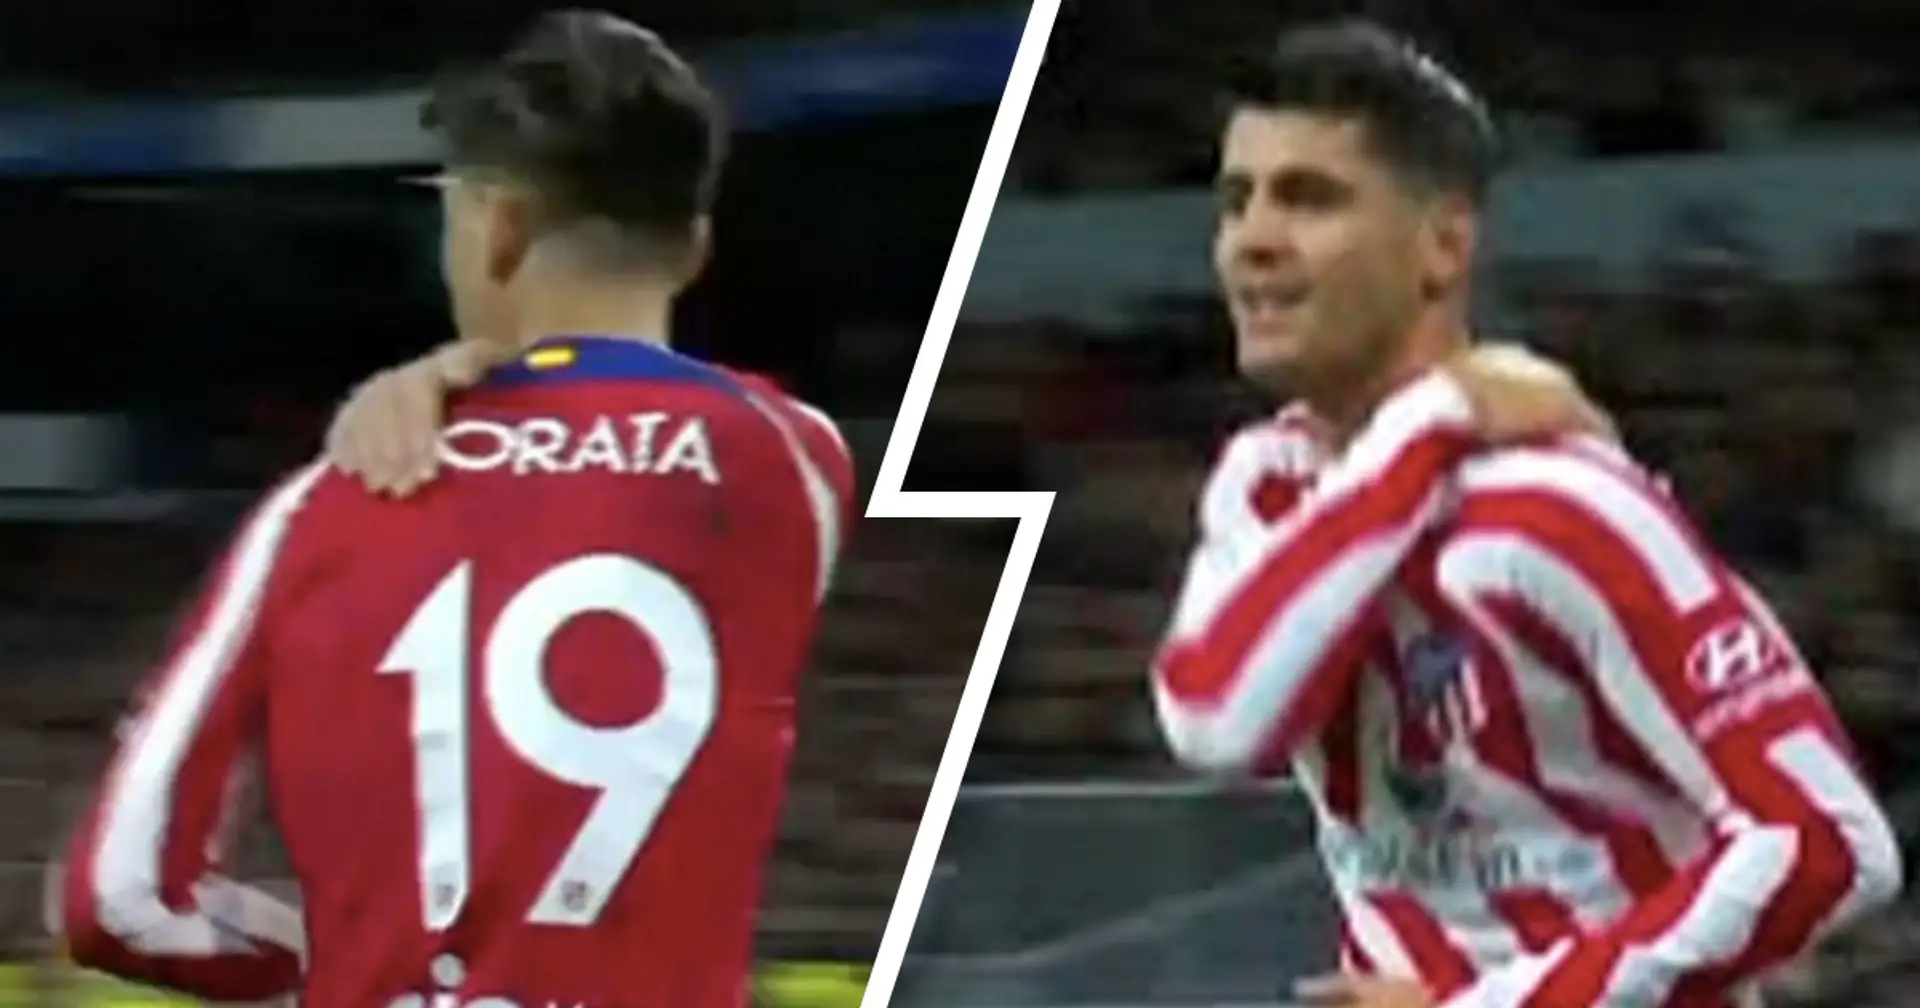 Explained: Why Morata closed 'M' letter while celebrating his goal v Real Madrid